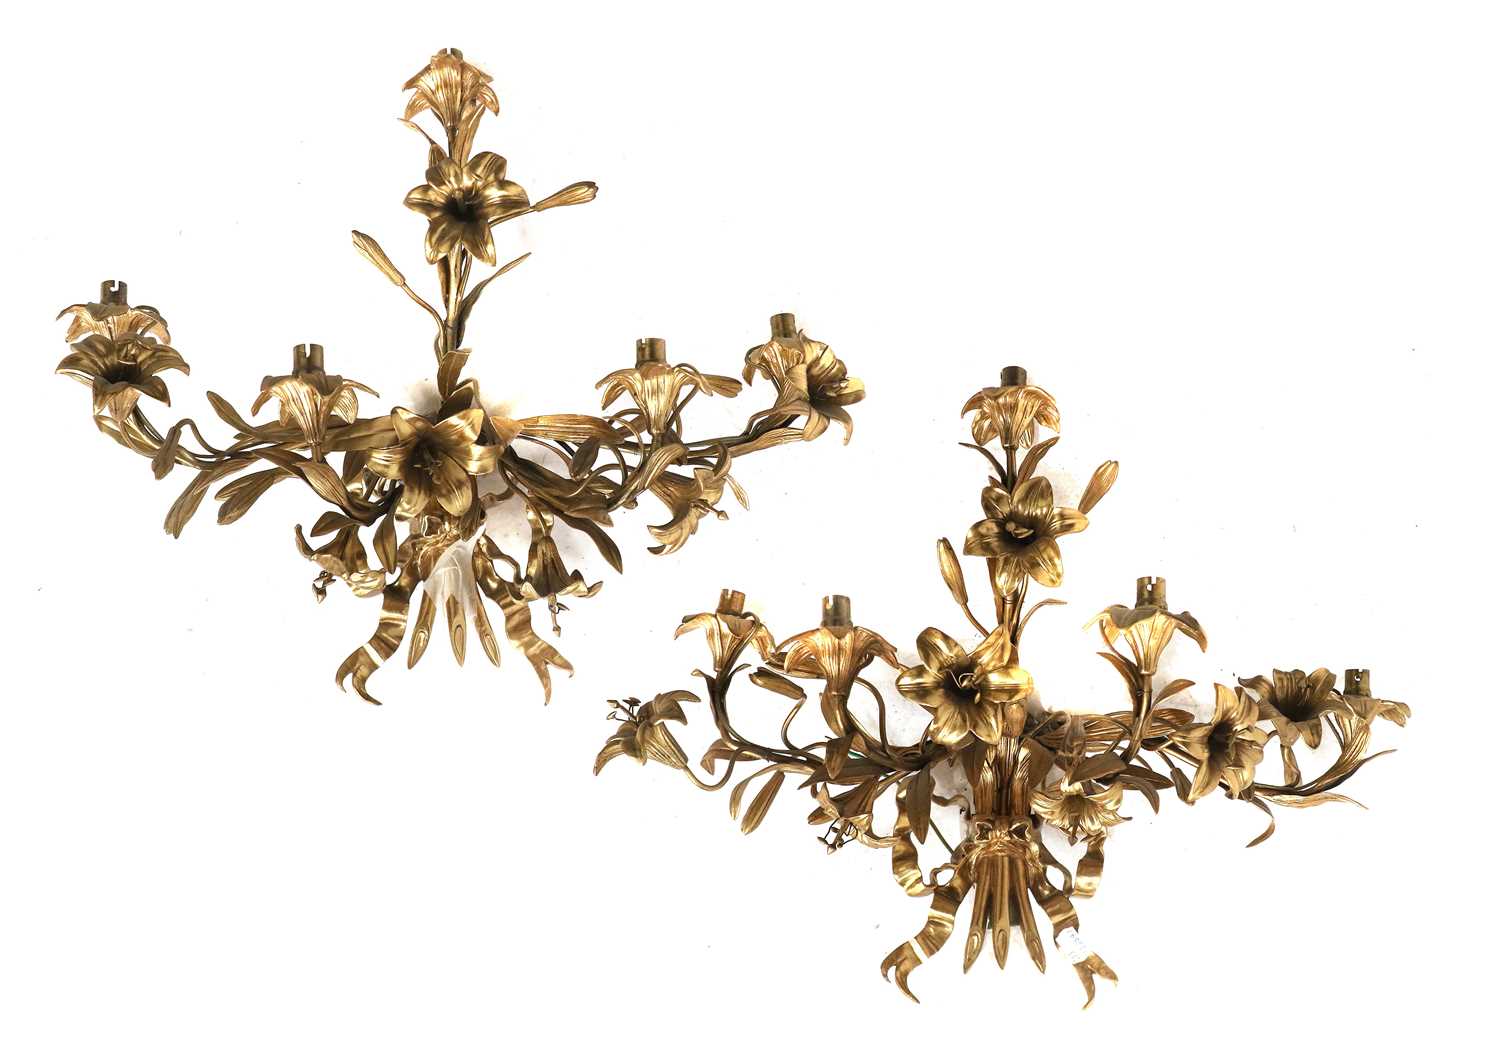 A Pair of Gilt-Metal Five-Light Wall Sconces, in Louis XVI style, as a ribbon-tied bunch of